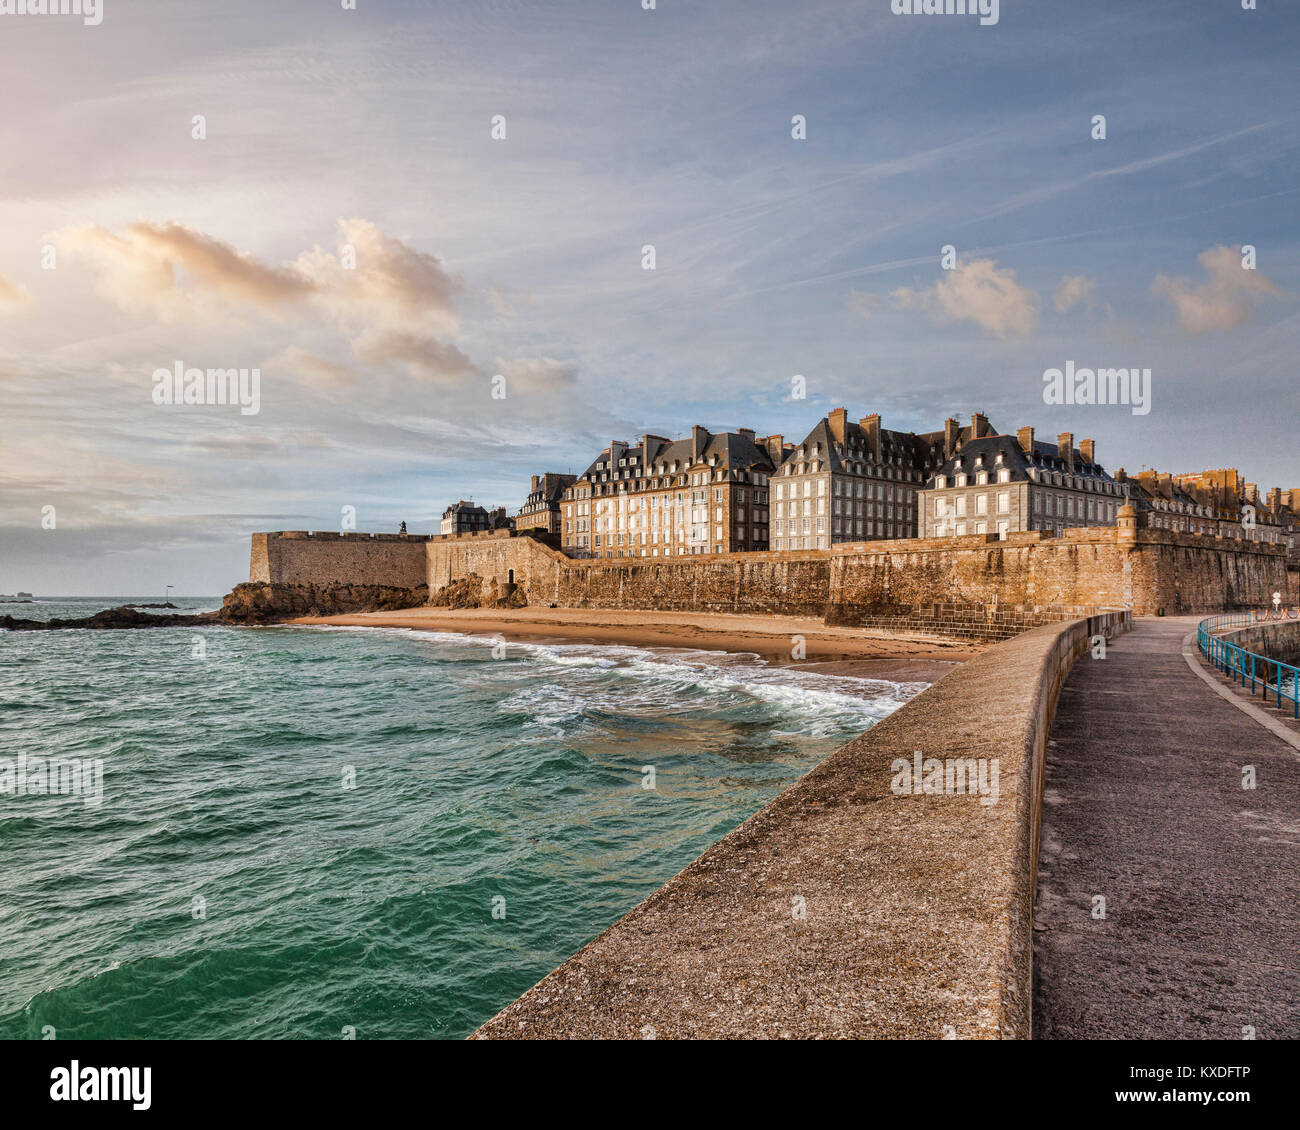 The old town of Saint-Malo, Brittany, France, at sunset. Stock Photo